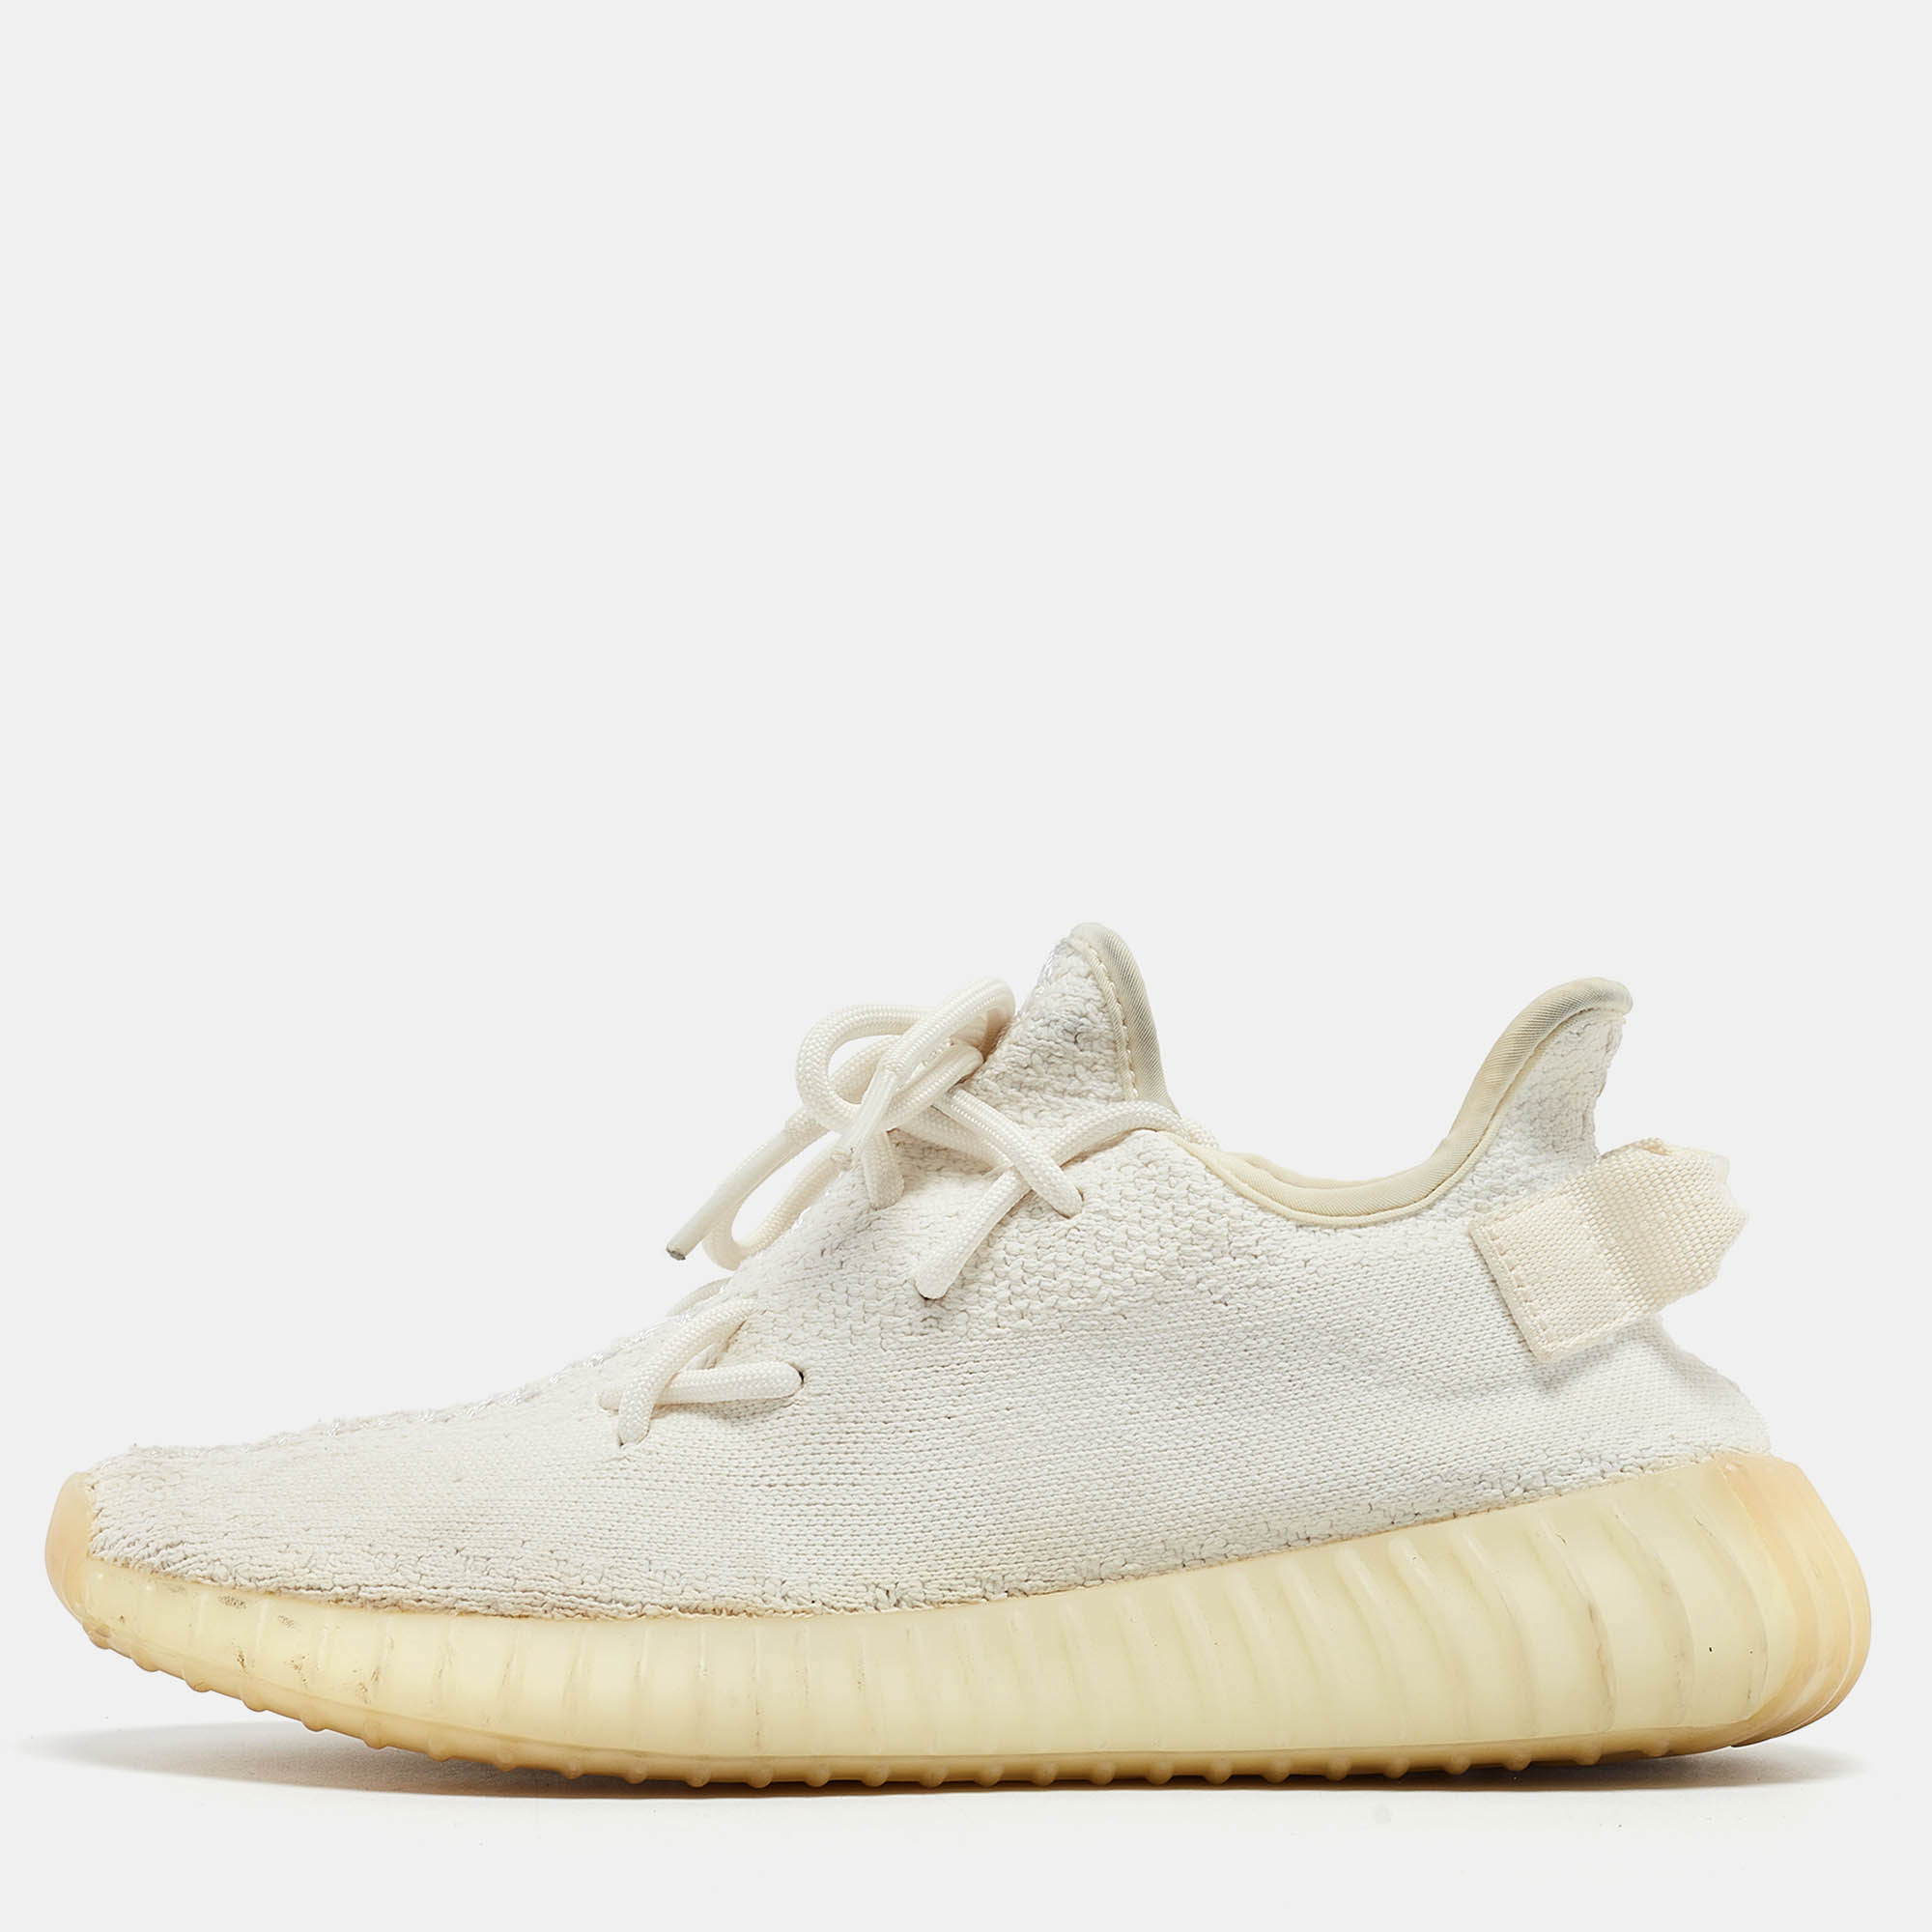 Catch on with the trend of designs from the Yeezy x Adidas collaboration with this pair of Boost 350 V2 sneakers. The knit pair features great cushioning lace ups on the vamps platforms and tough rubber soles. This pair comes in white hues.